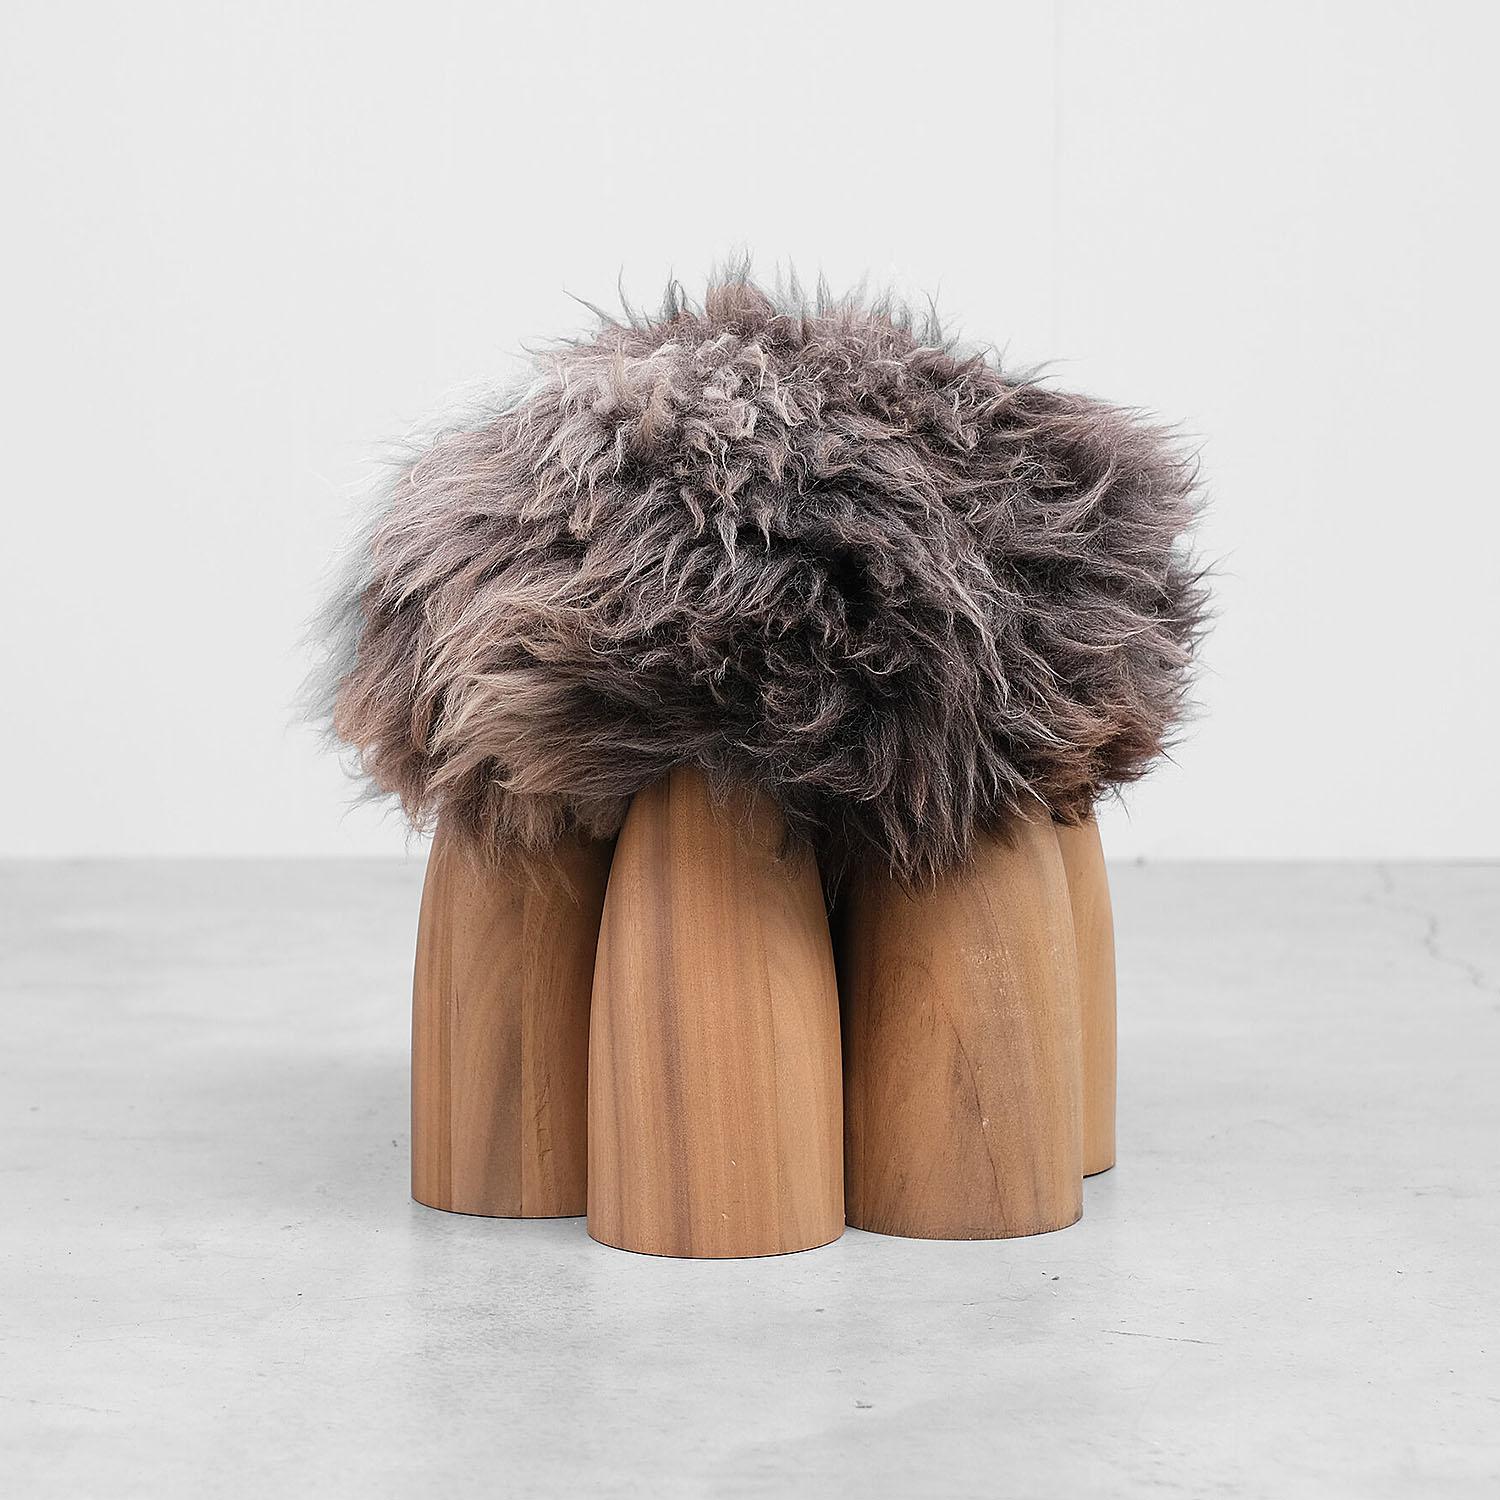 Contemporary ottoman in African walnut and sheep wool - Senufo by Arno Declercq

Dimensions: diameter 45 x height 40 cm
Material: African walnut and sheep wool. (ask for different wool colors)

Made by hand, in Belgium.
Crate included in the